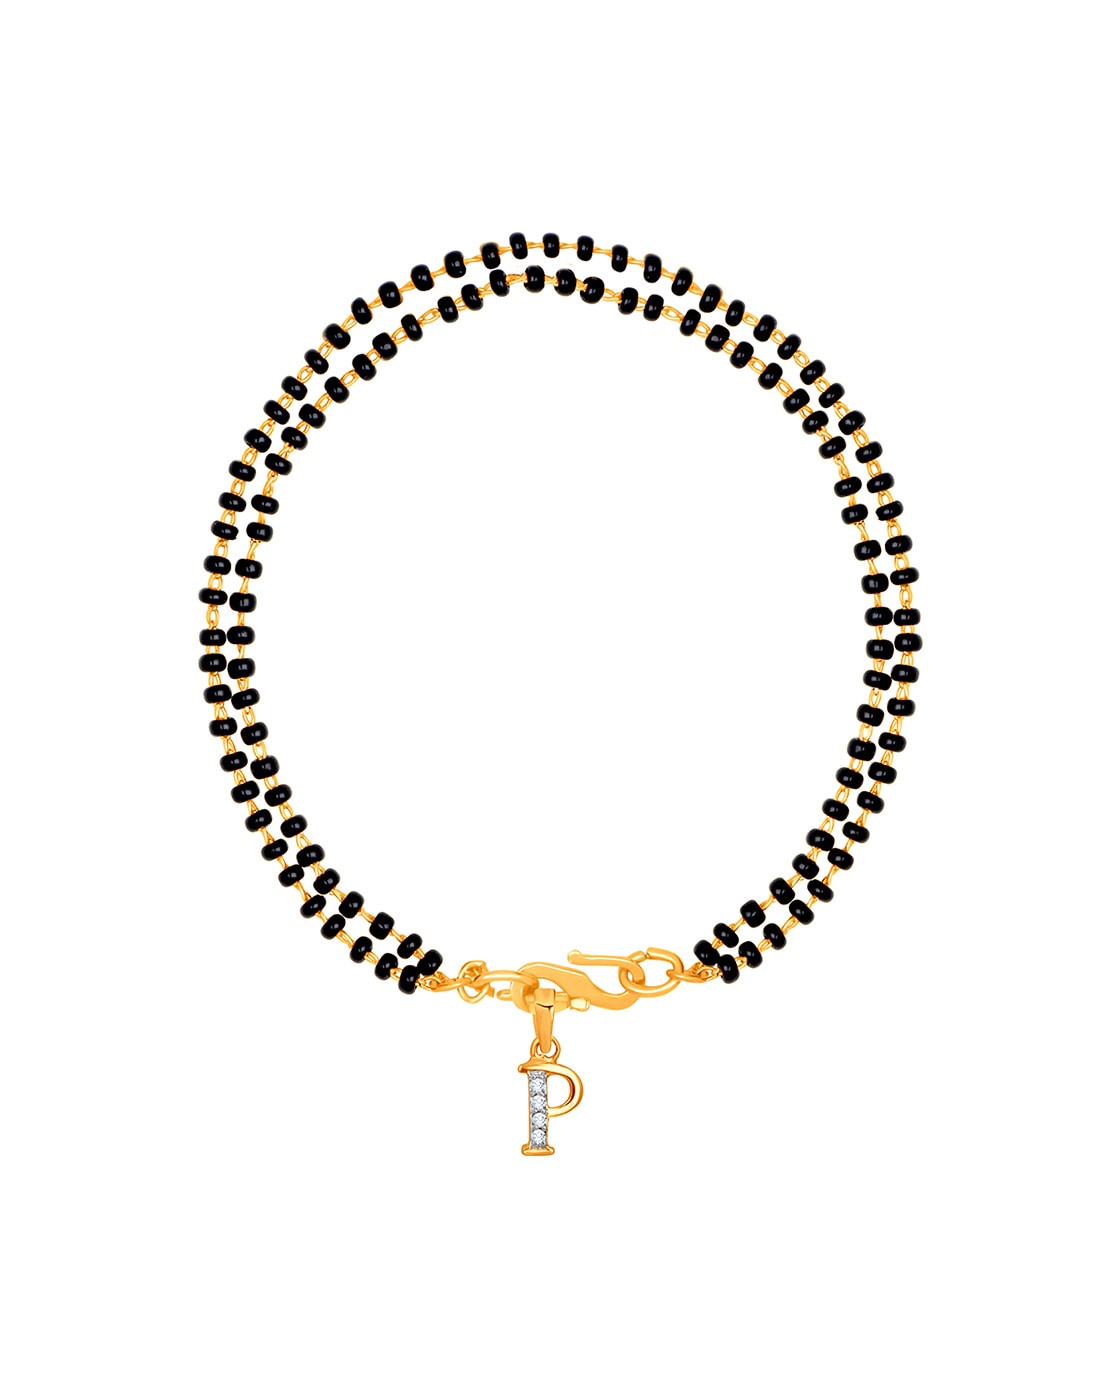 Buy JHB Gold plated Brass Beads Hand Mangalsutra Bracelet for Women at  Amazon.in